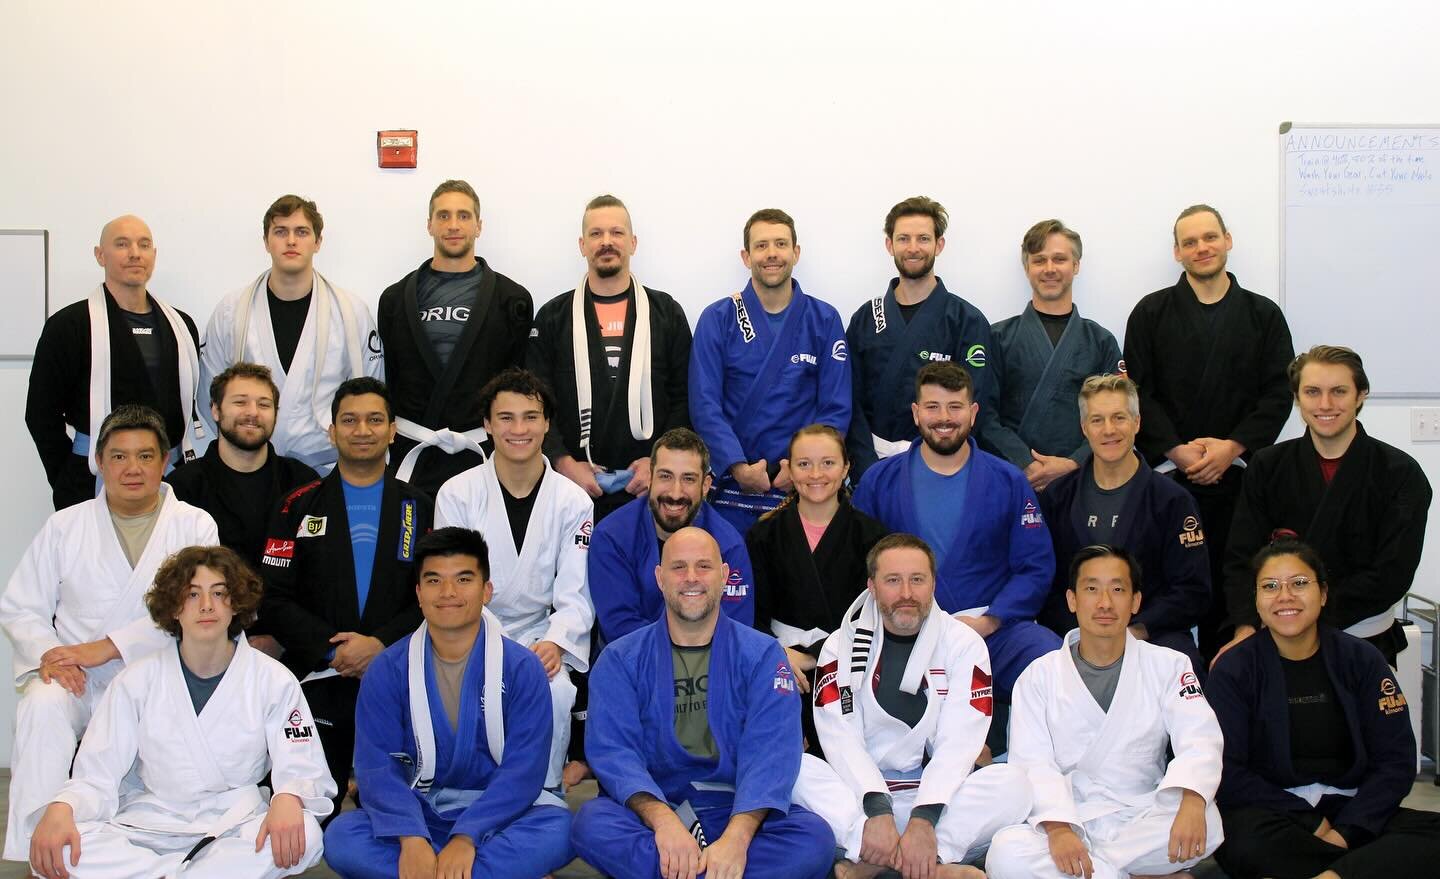 Congratulations to everyone that leveled up recently!! Special thanks to @stilll_drew for organizing and taking the photos! #zoobjjsea #westseattle